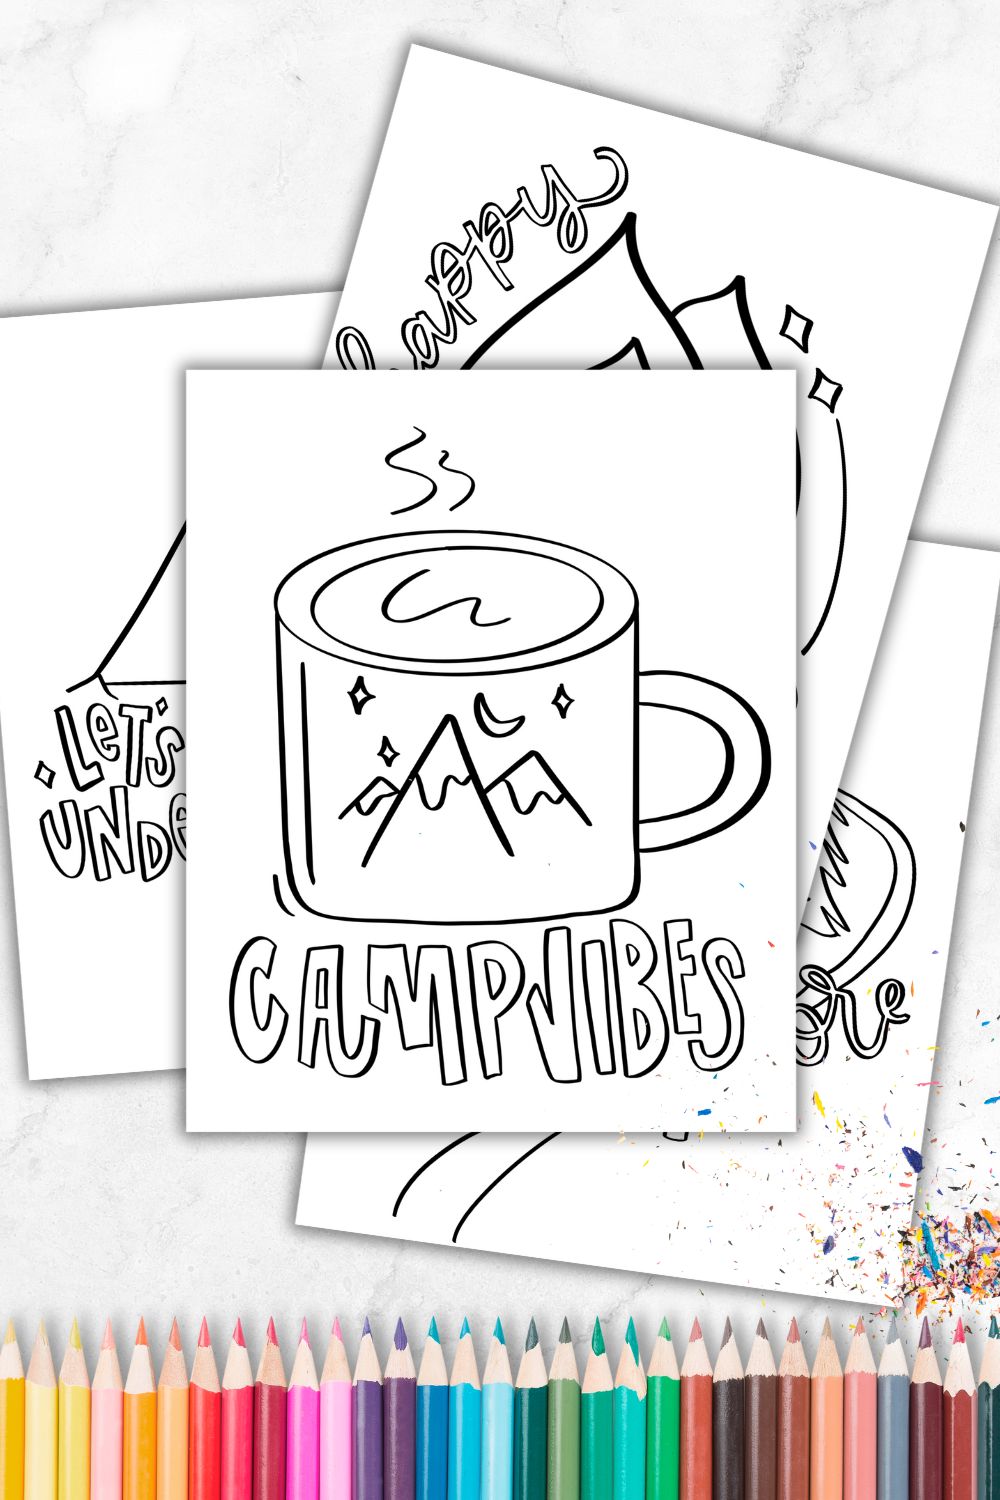 4 camping coloring sheets on marble countertop with pencil crayons. Coloring sheets designed with chunky brush lettering style with hand lettered phrases like 'camp vibes', 'happy camper' 'let's sleep under the stars' and 'let's explore' with line illustrations ready for coloring of a camp mug, campfire, tent under the night sky and trees with hiking trail.